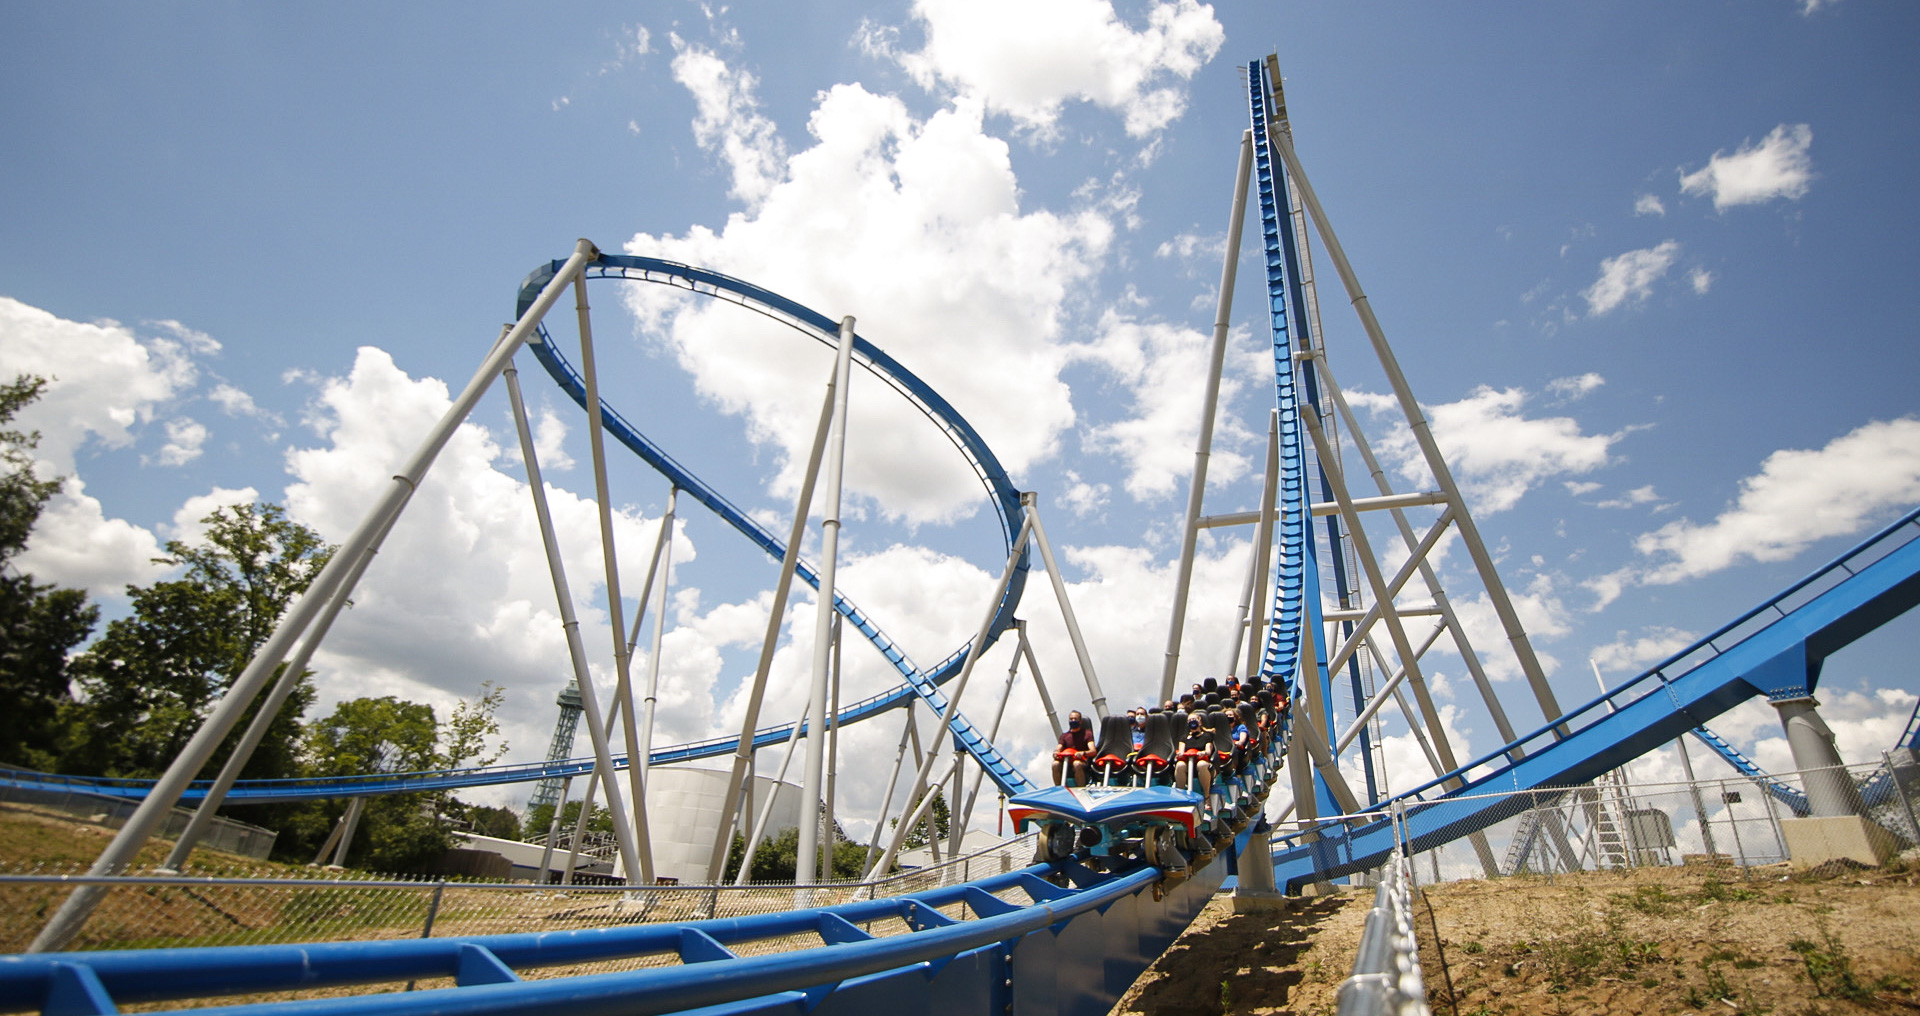 Kings Island Amusement Park debuts Orion, the seventh giga coaster in